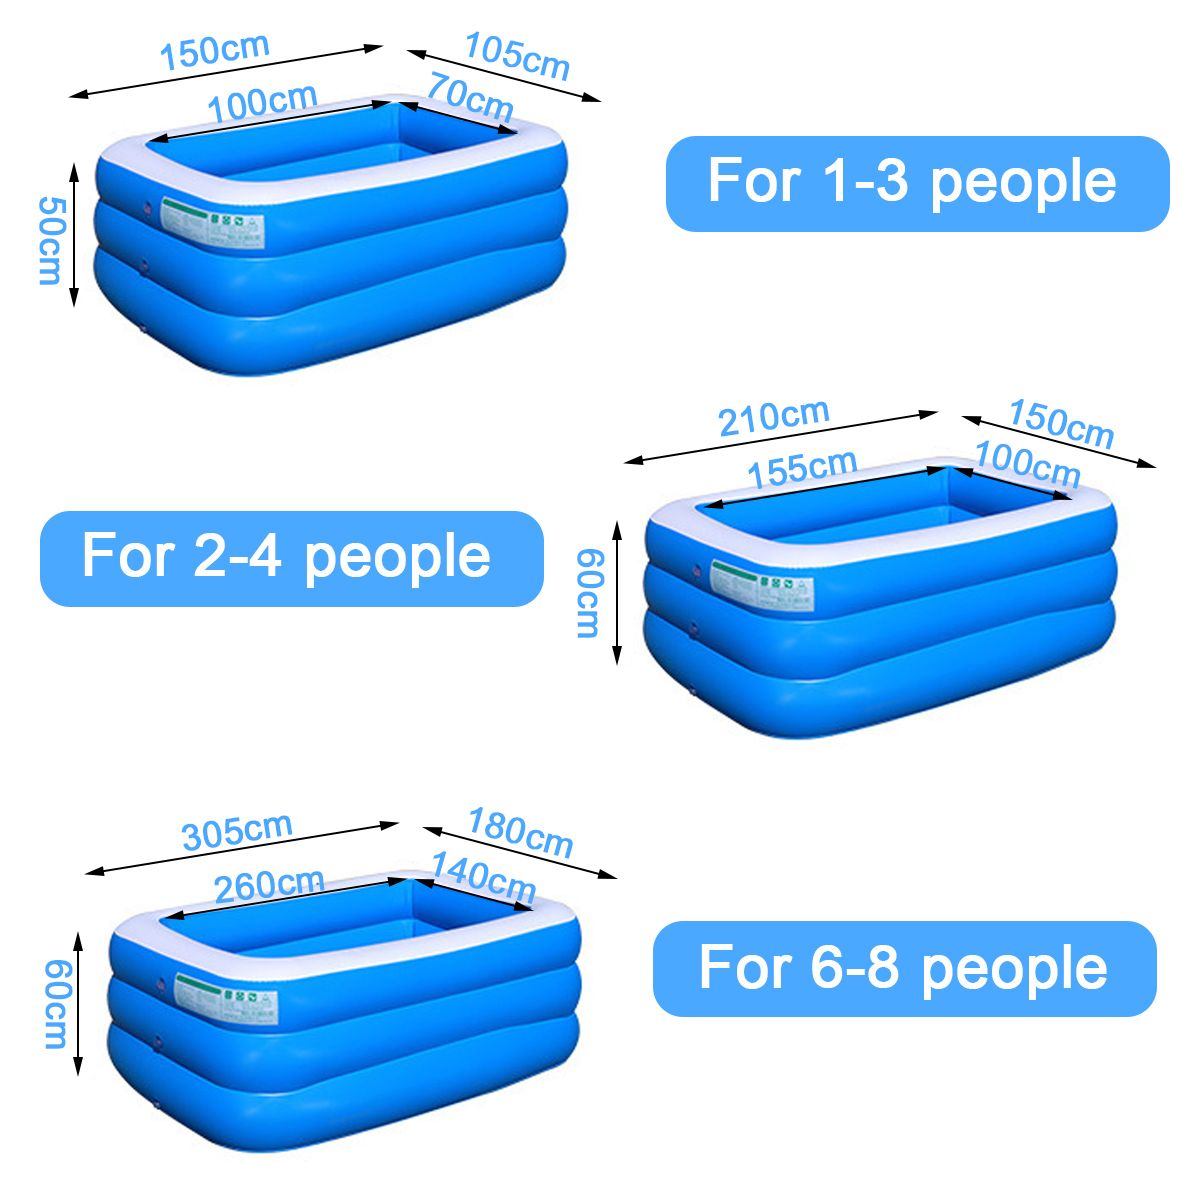 3-Layer-Blue-And-White-Inflatable-Foldable-Portable-Swimming-Pool-Bathtub-for-Adult-Children-Home-1708546